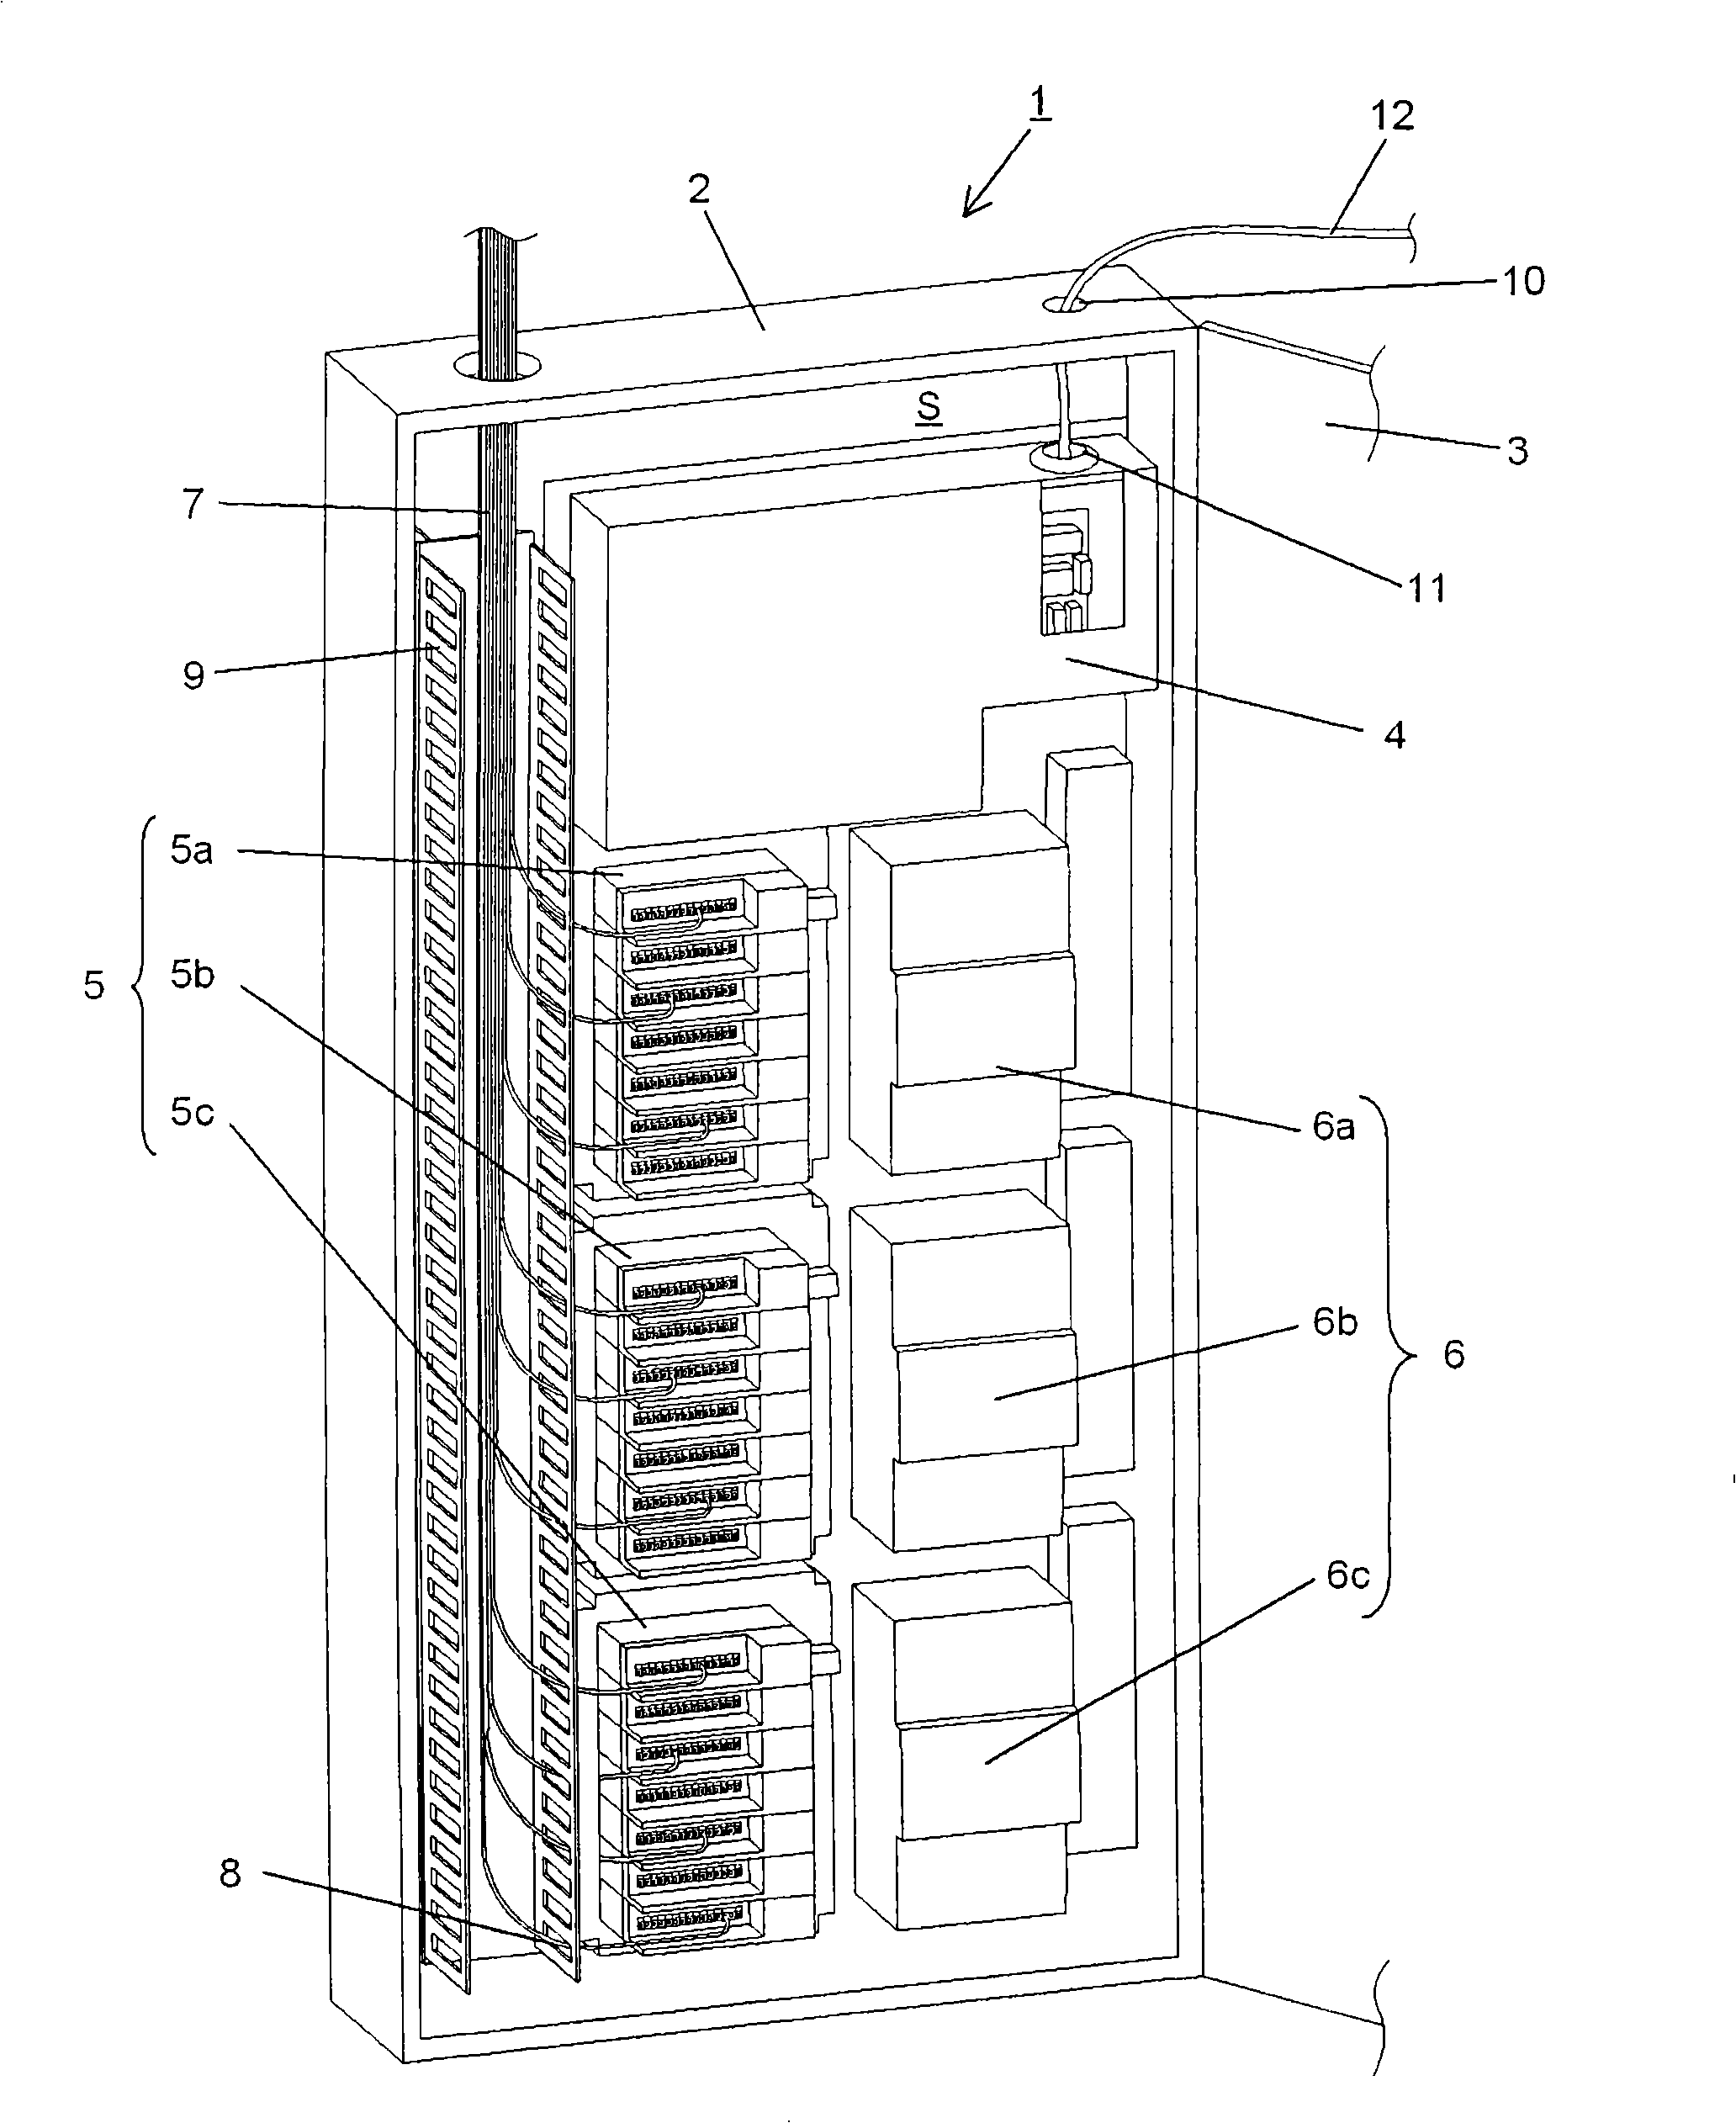 Control disc device